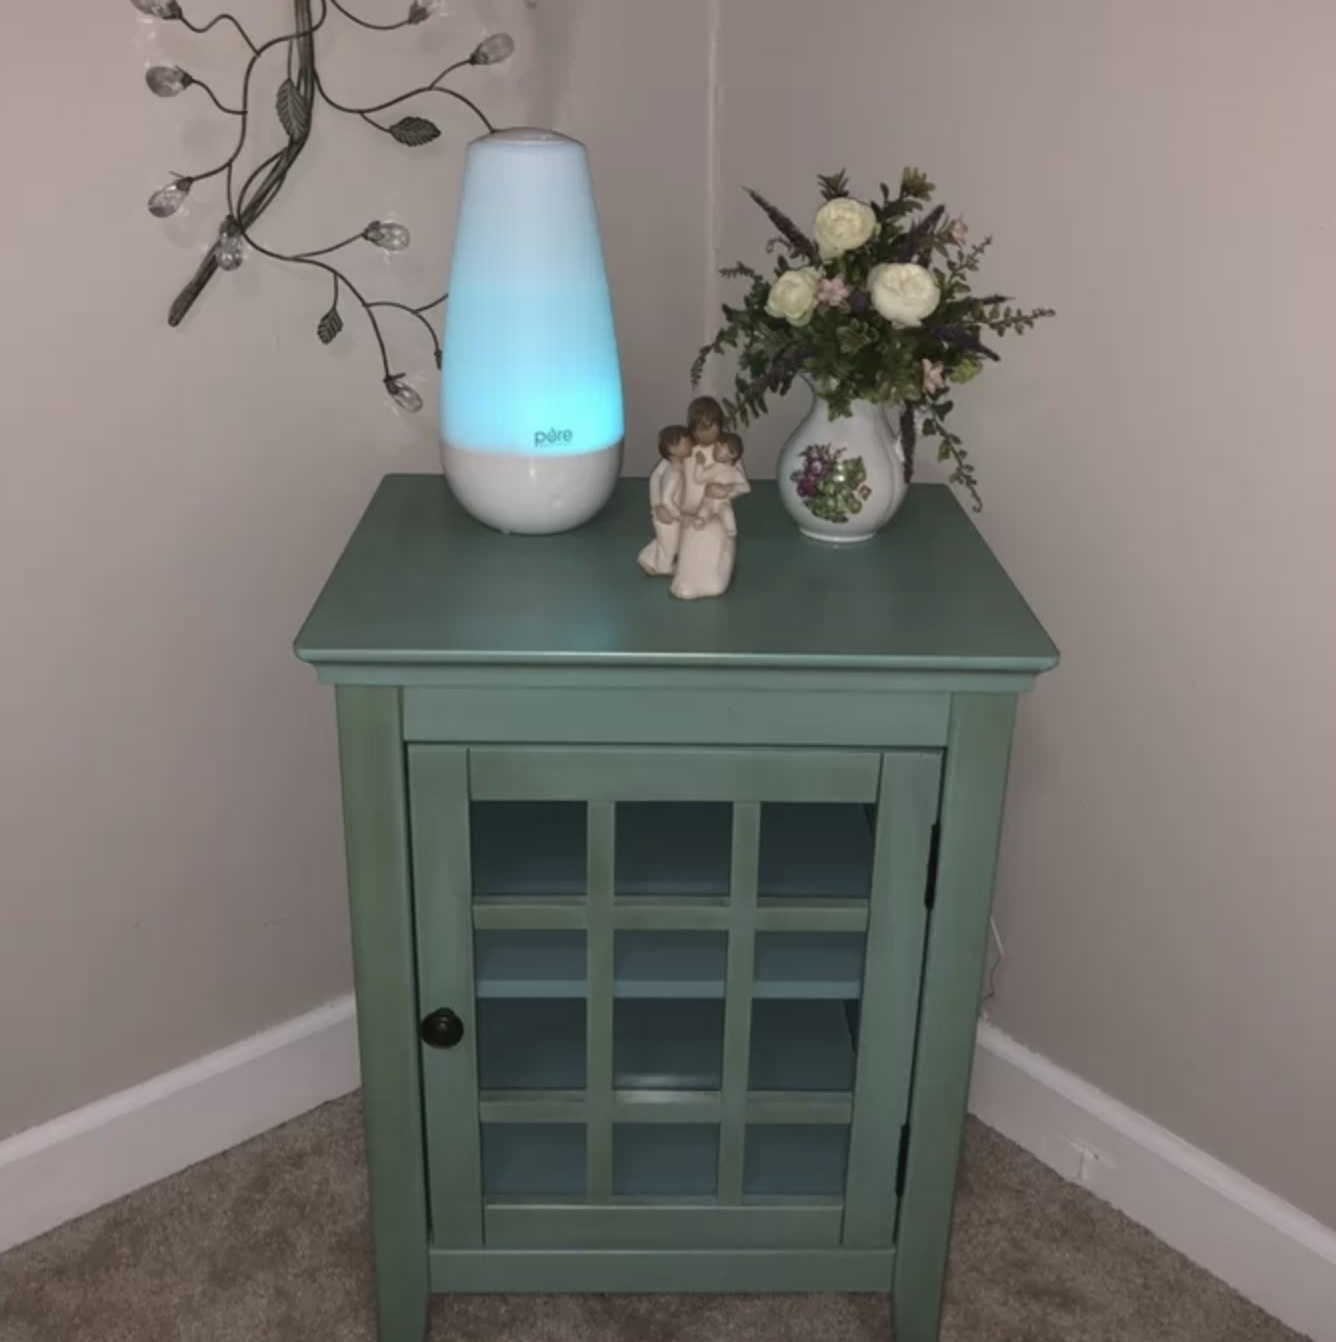 The blue humidifier is on top of a small green table with decor